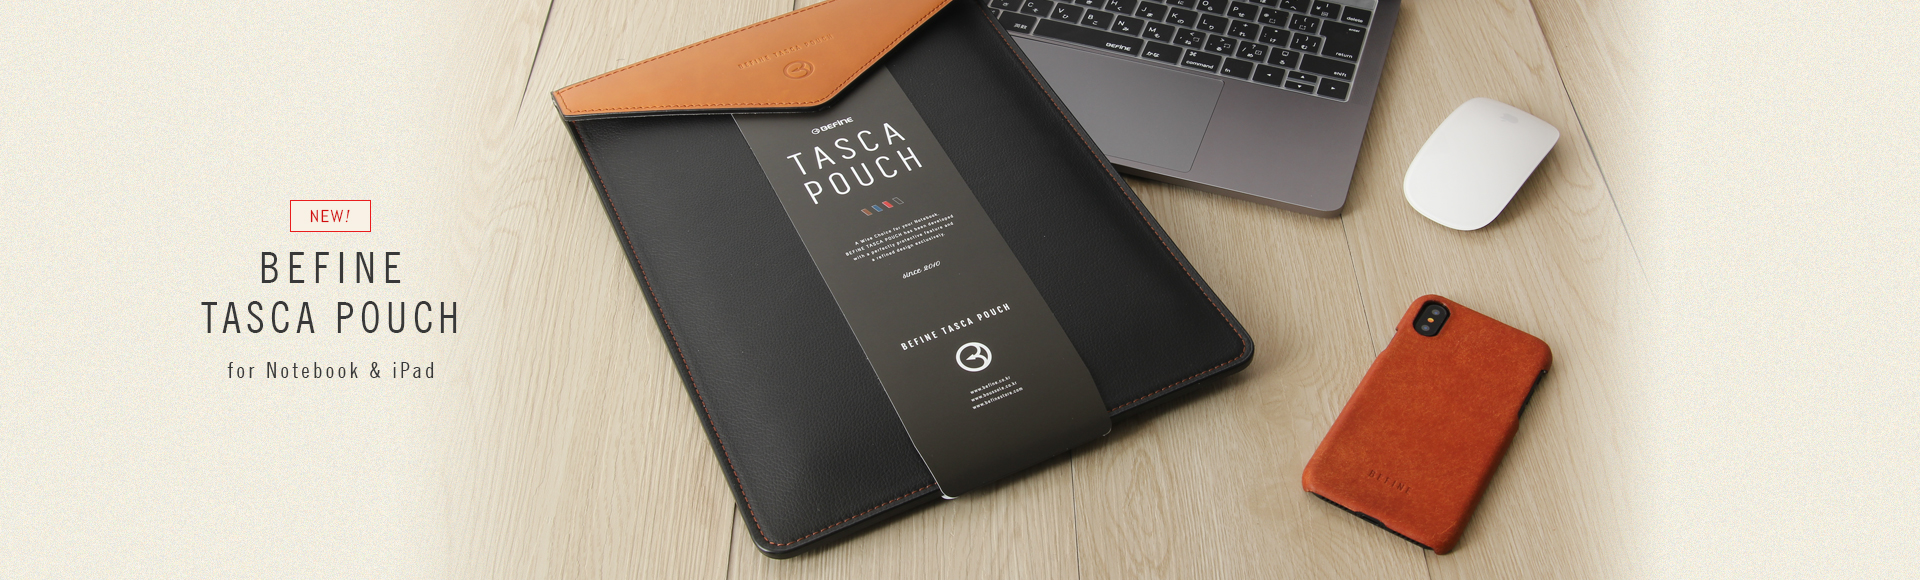 tasca pouch for Notebook, iPad